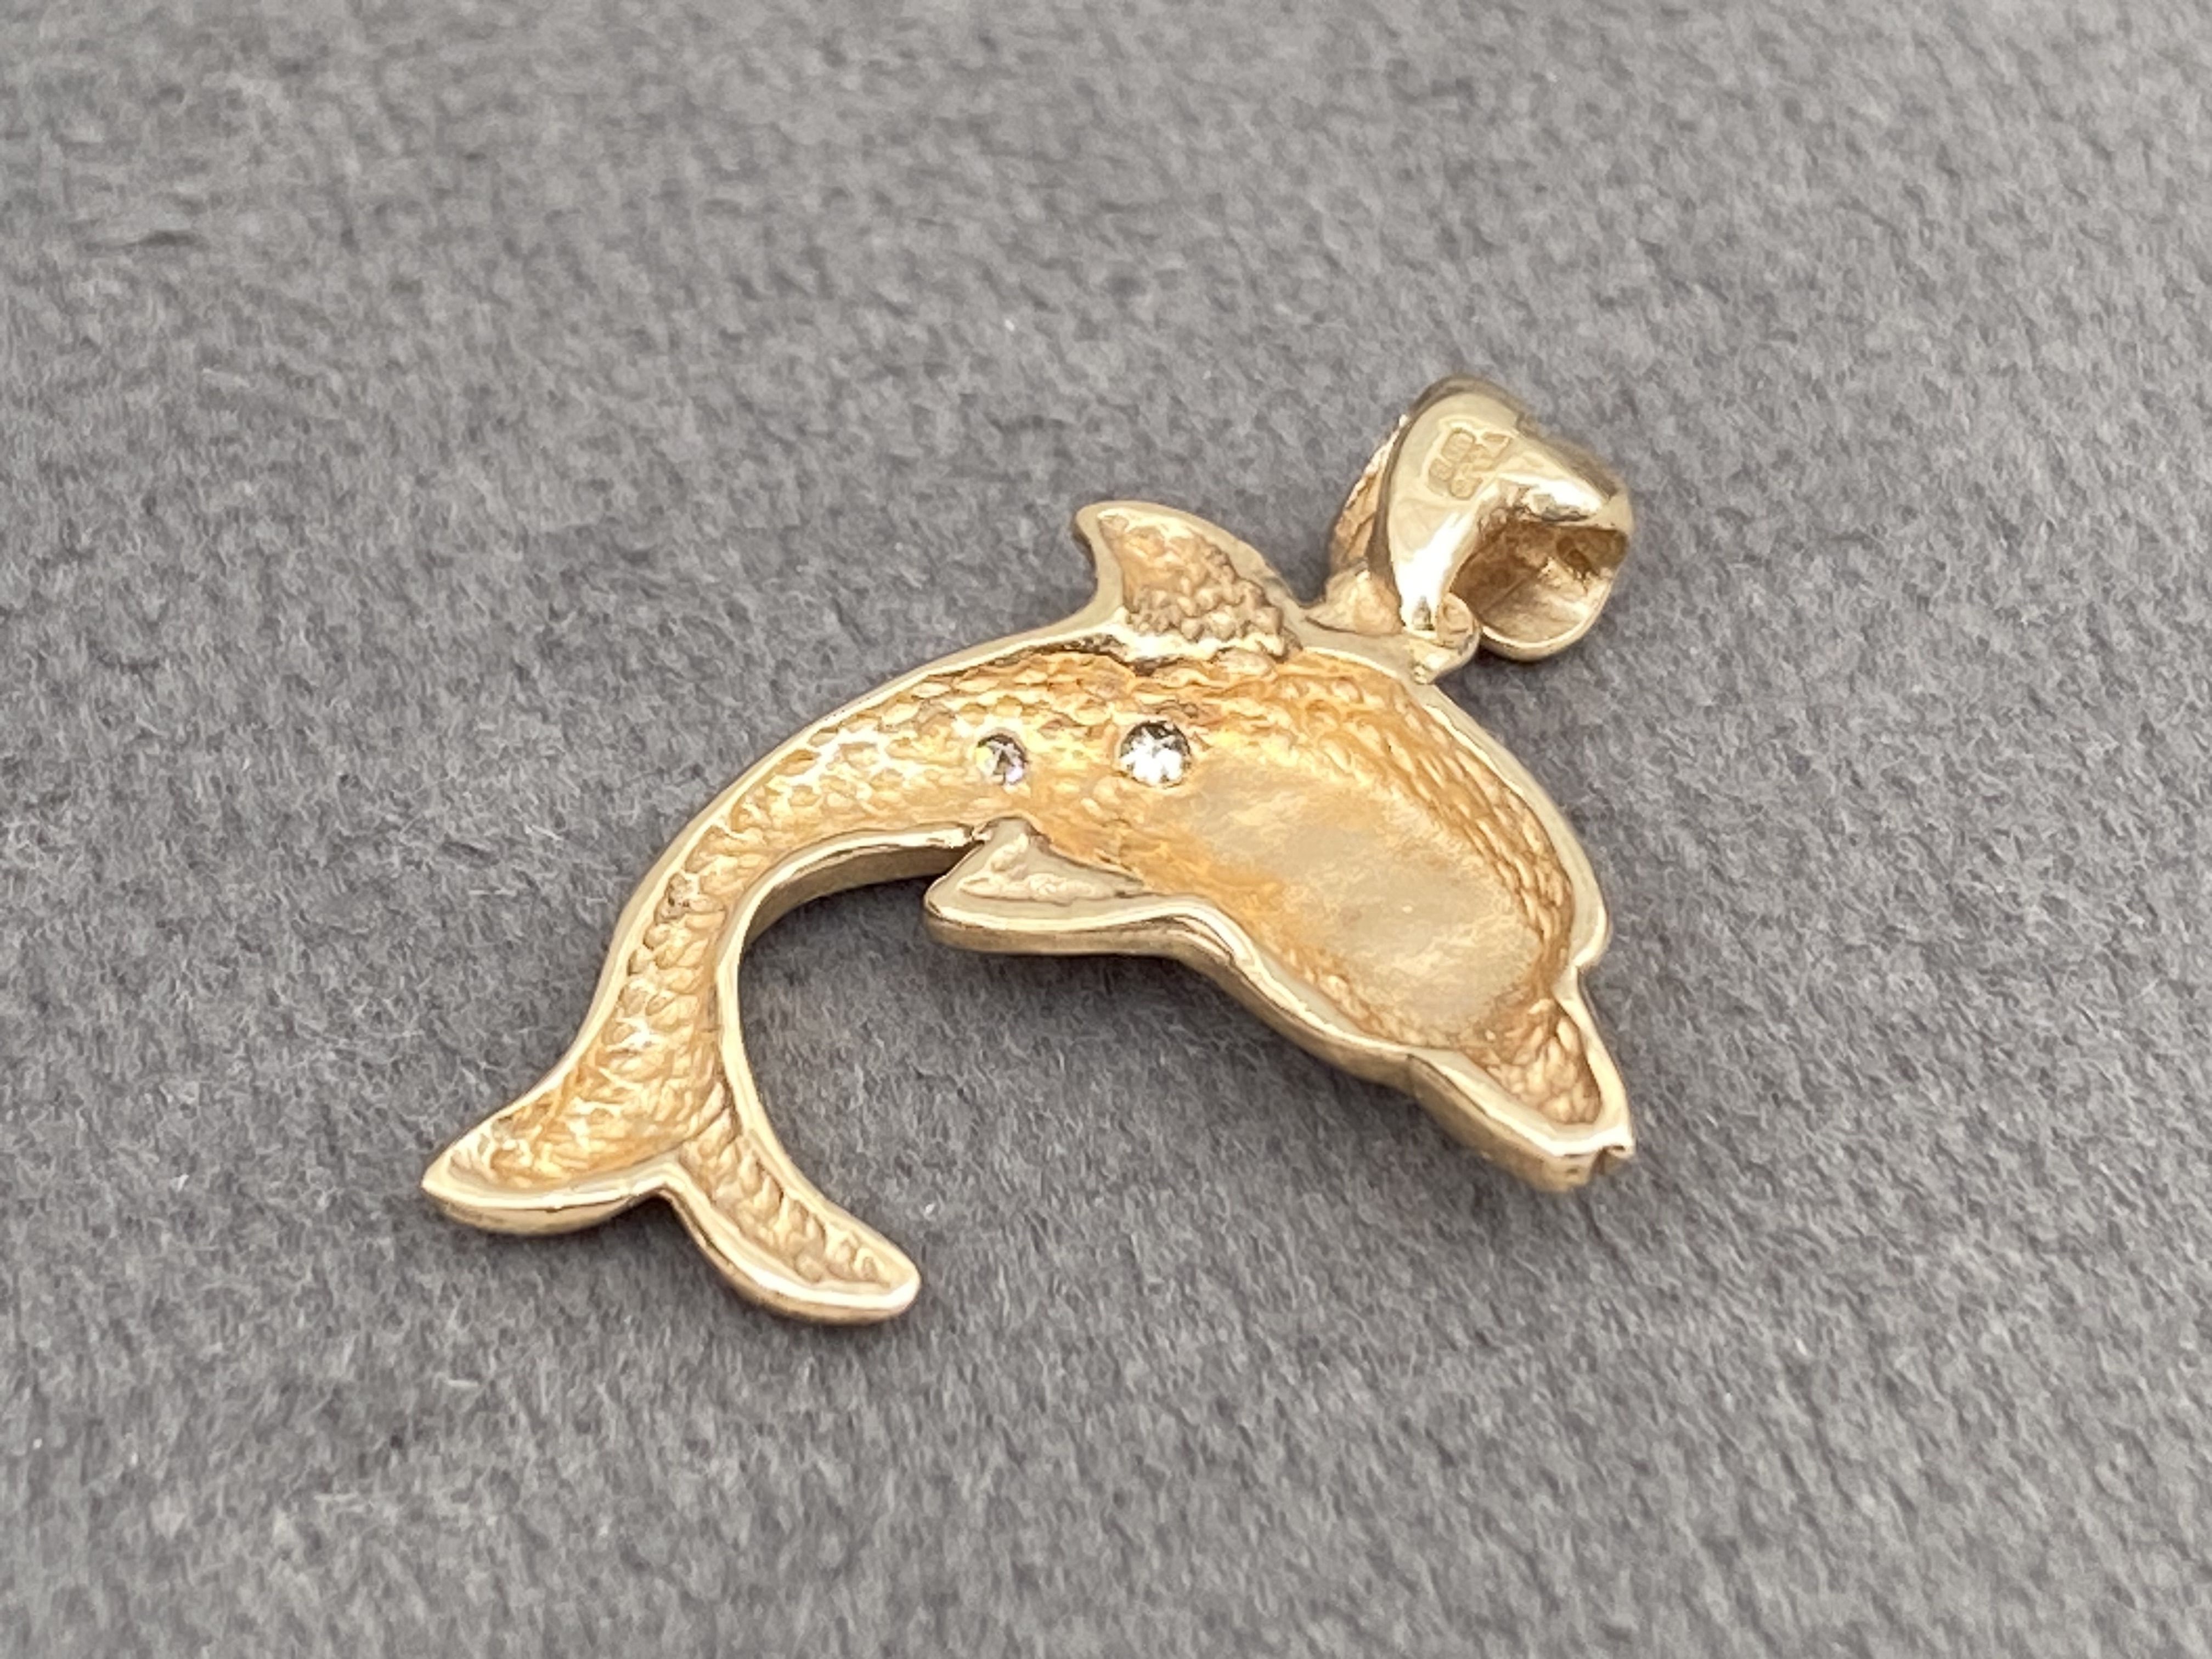 18ct dolphin pendant weighing 1.2 grams - Image 2 of 2